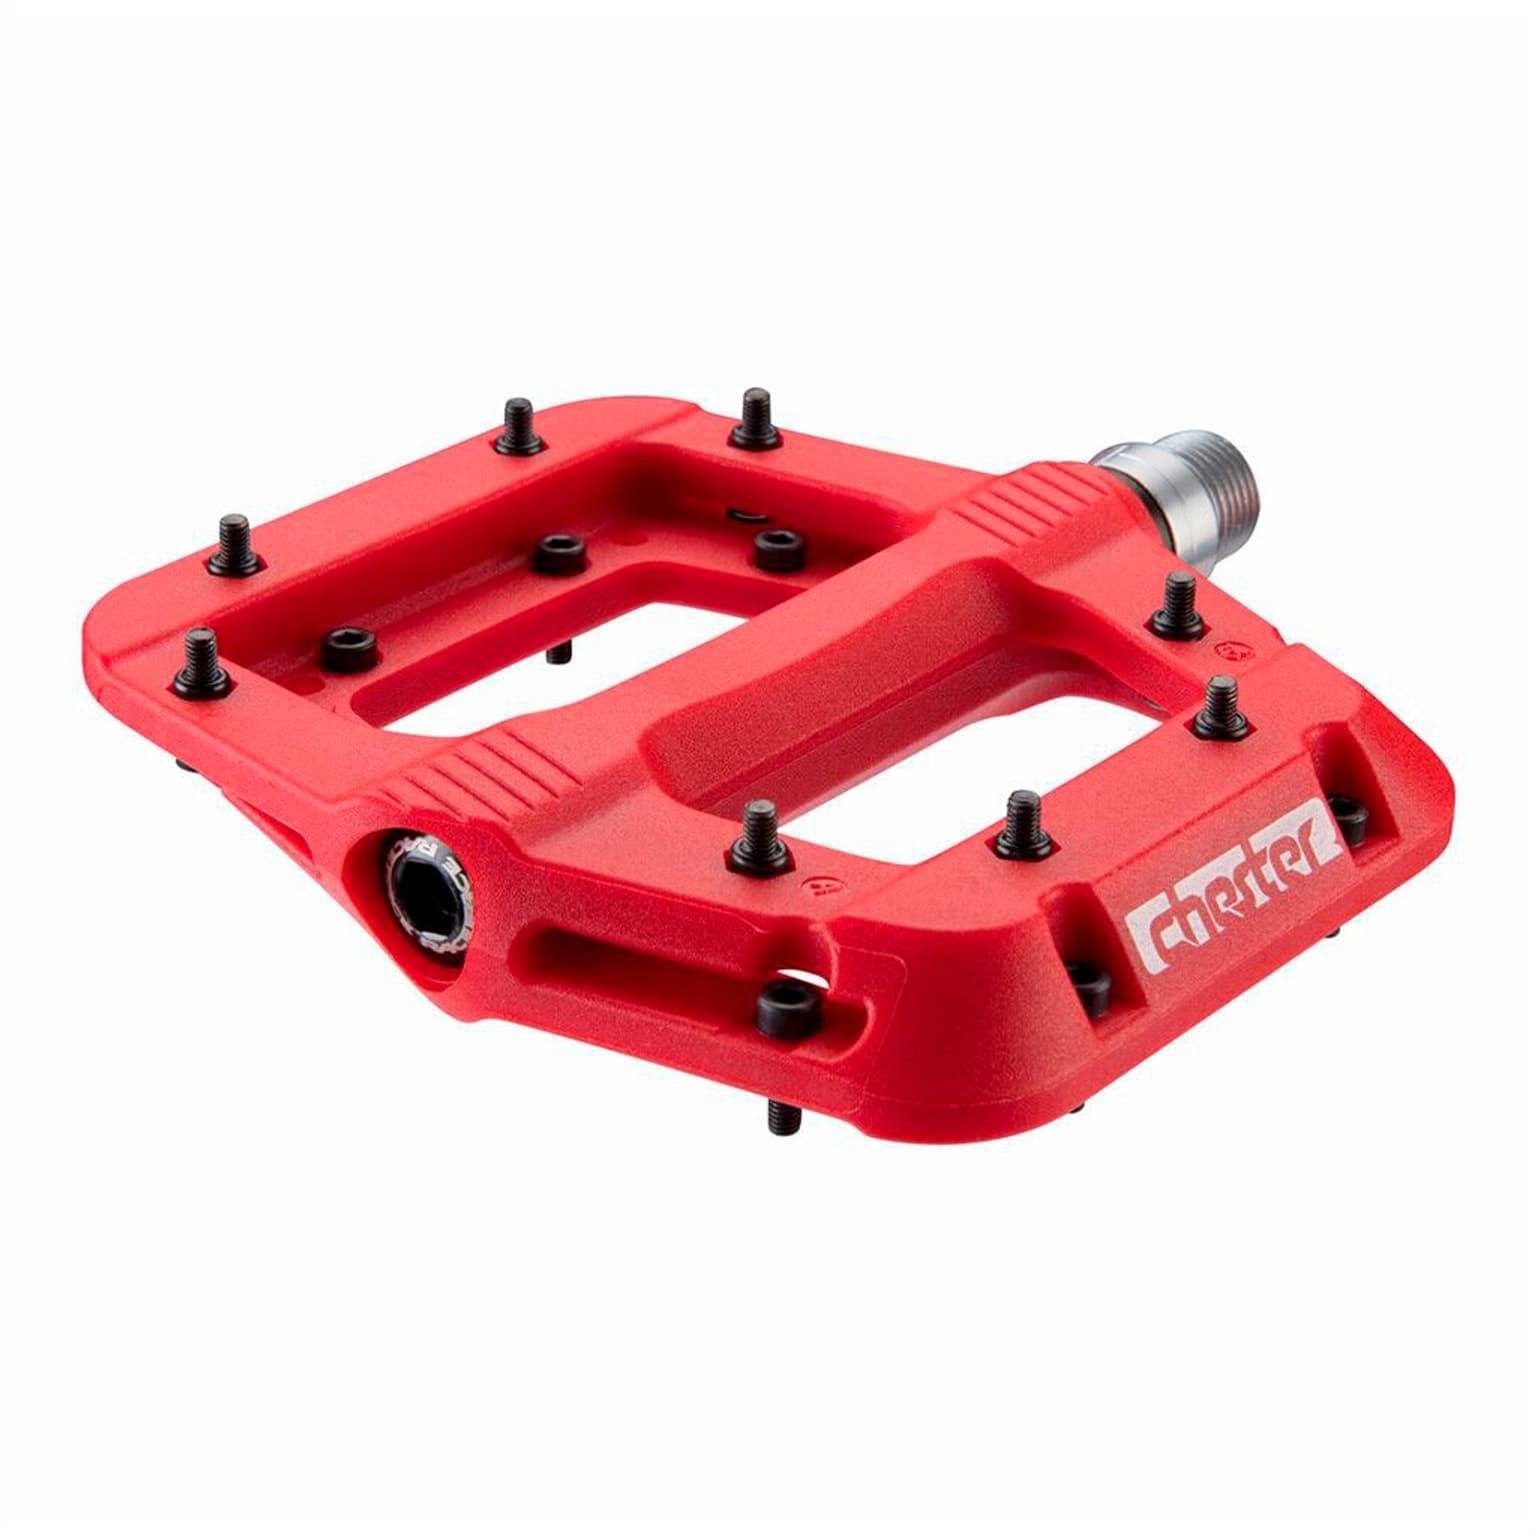 RaceFace RaceFace RaceFace Pedal Chester V2 Velopedale rouge 1